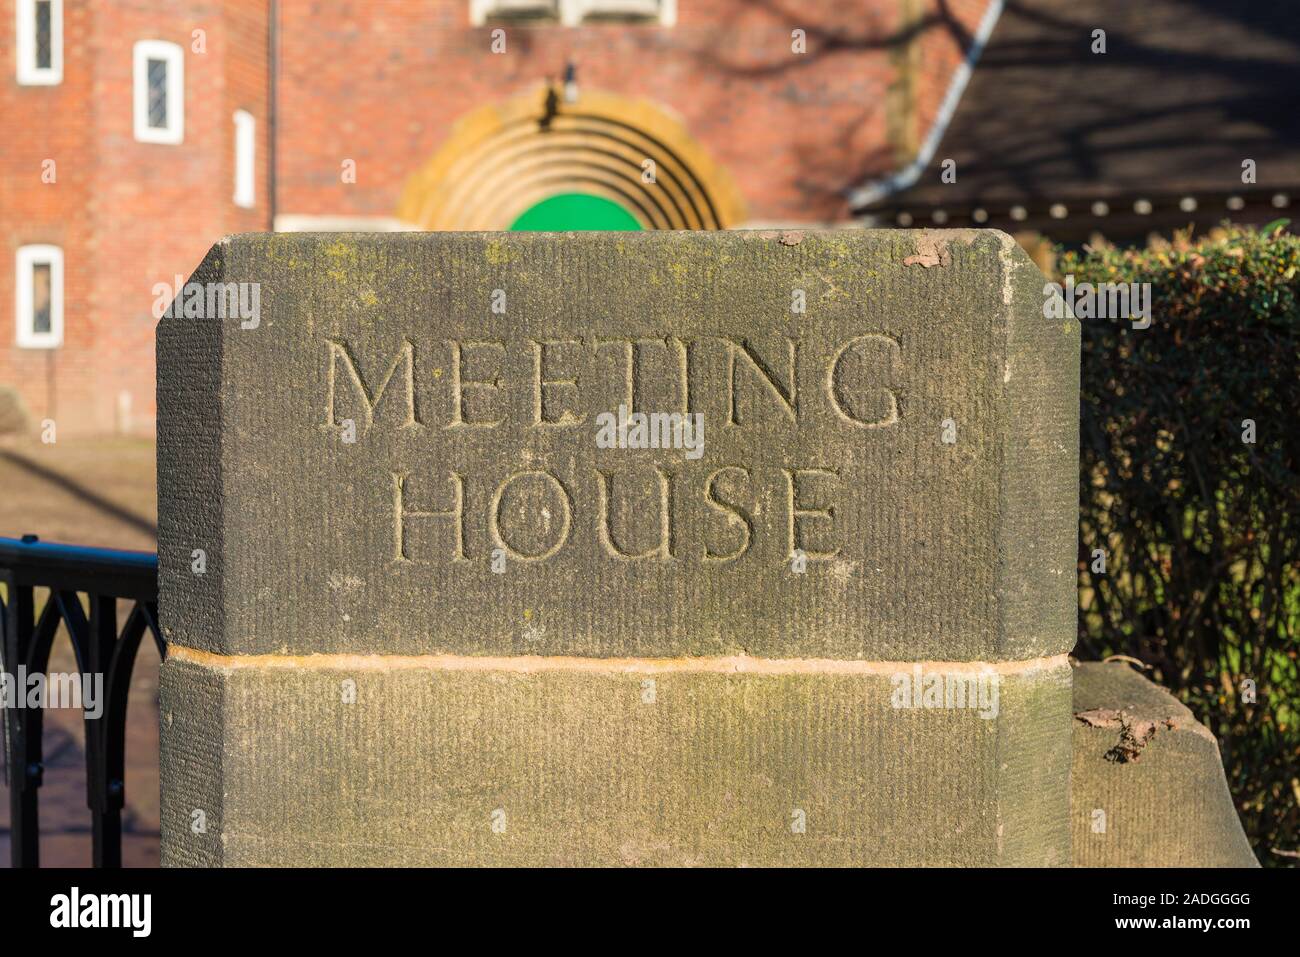 Religious Society of Friends Quaker Meeting House in Bournville, Birmingham, UK Stock Photo